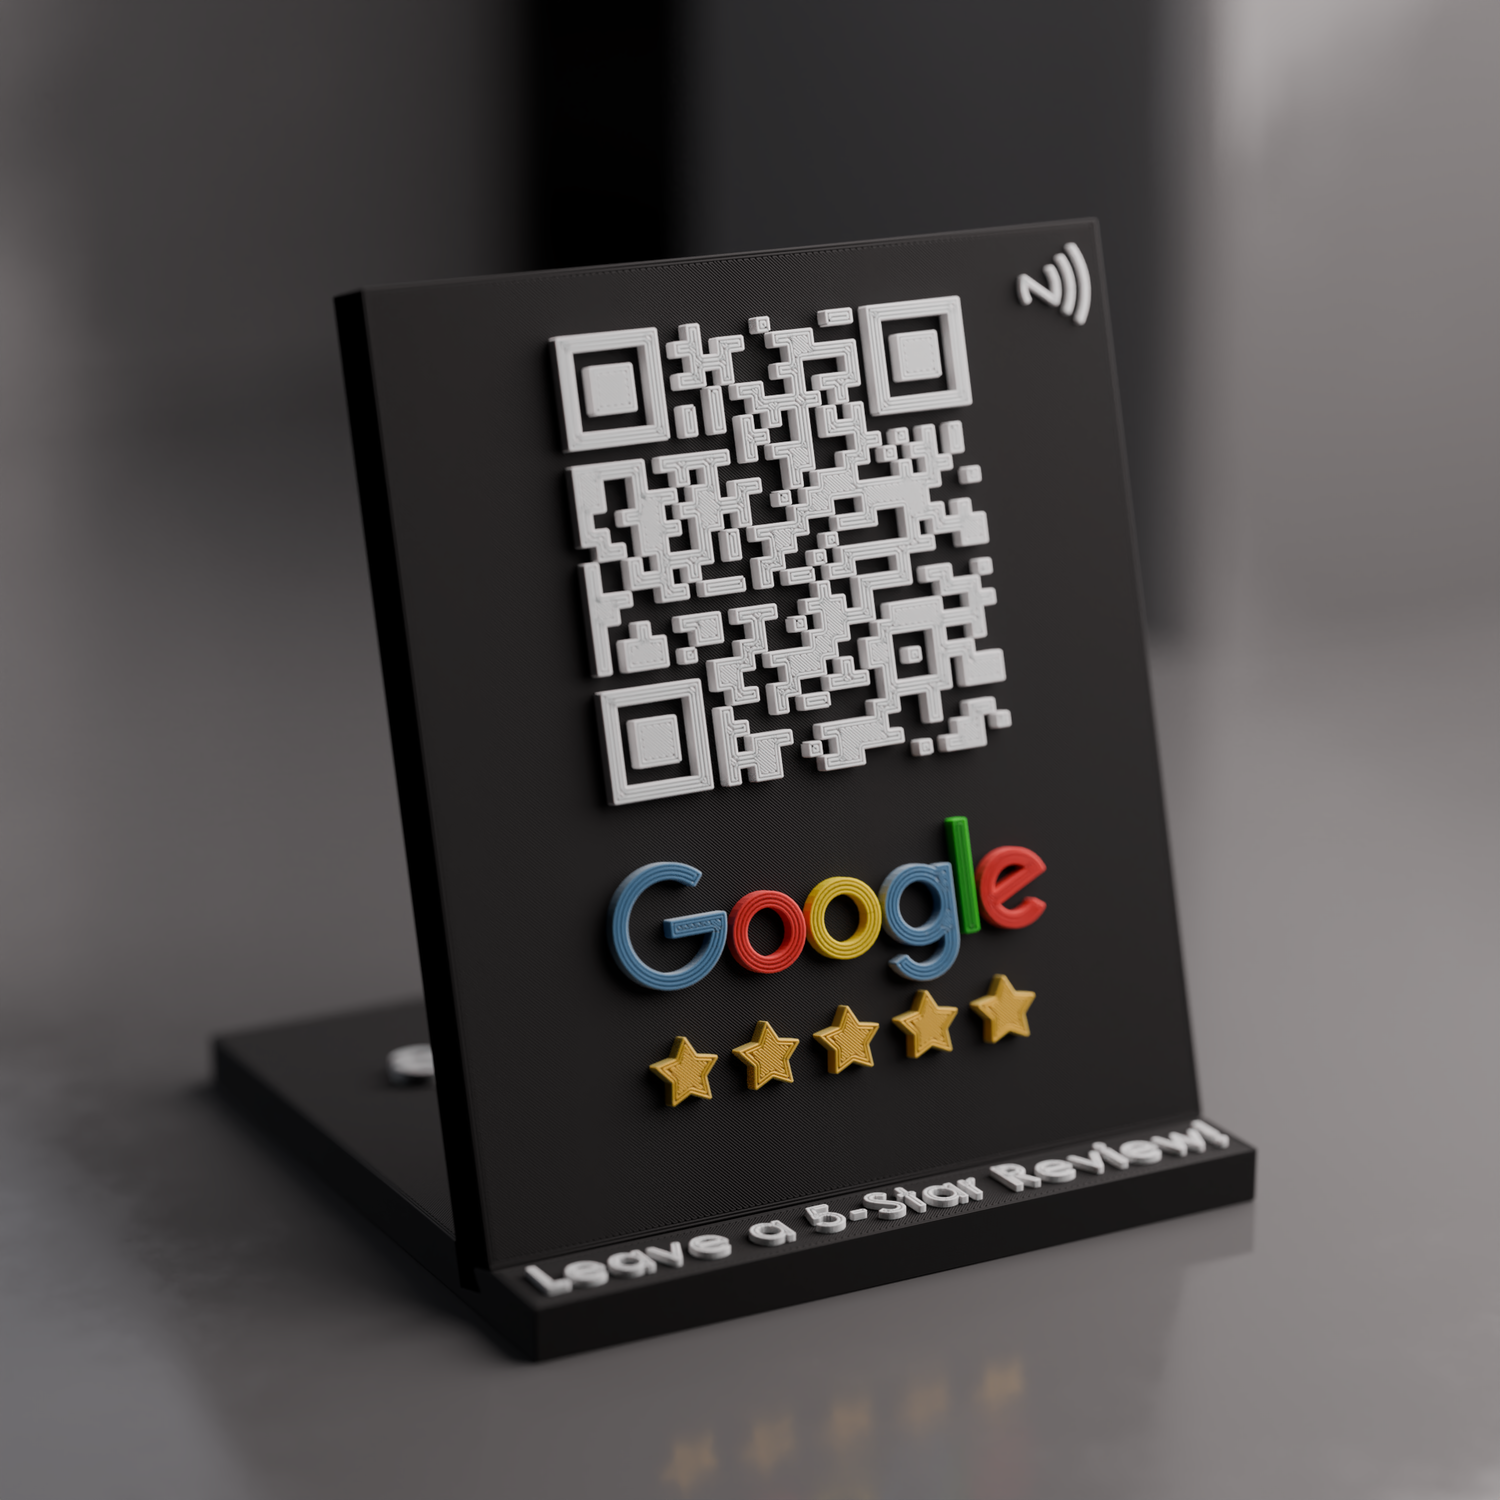 Our classic google review stand, use it and gain more 5 star reviews instantly